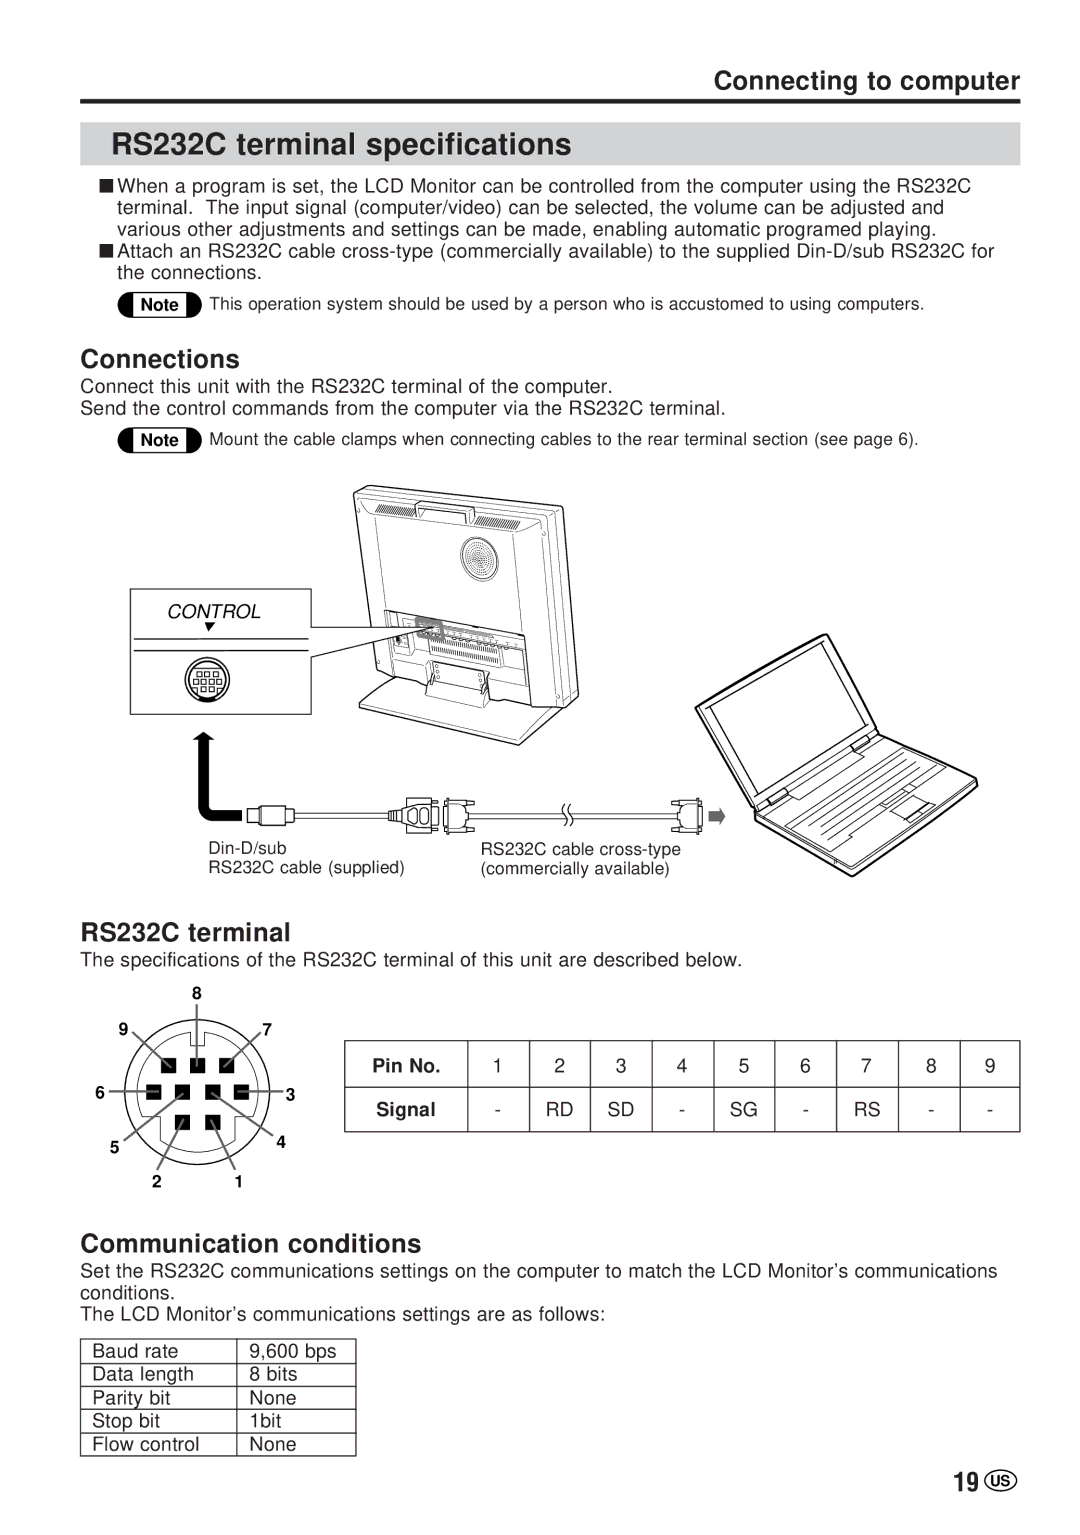 Sharp LC-20VM2 operation manual RS232C terminal specifications, Connections, Communication conditions, 19 US 